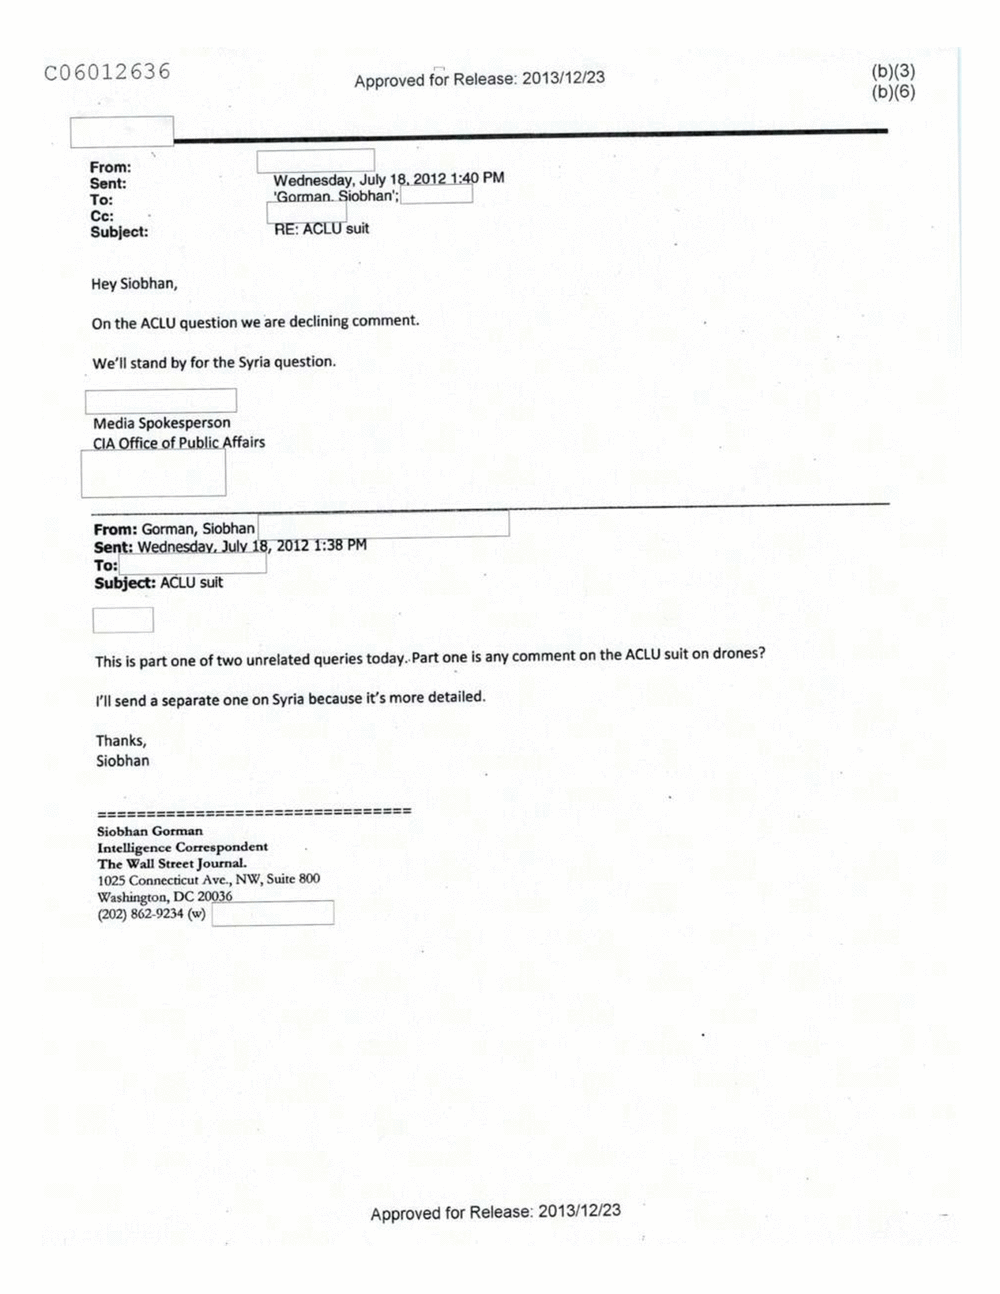 Page 200 from Email Correspondence Between Reporters and CIA Flacks